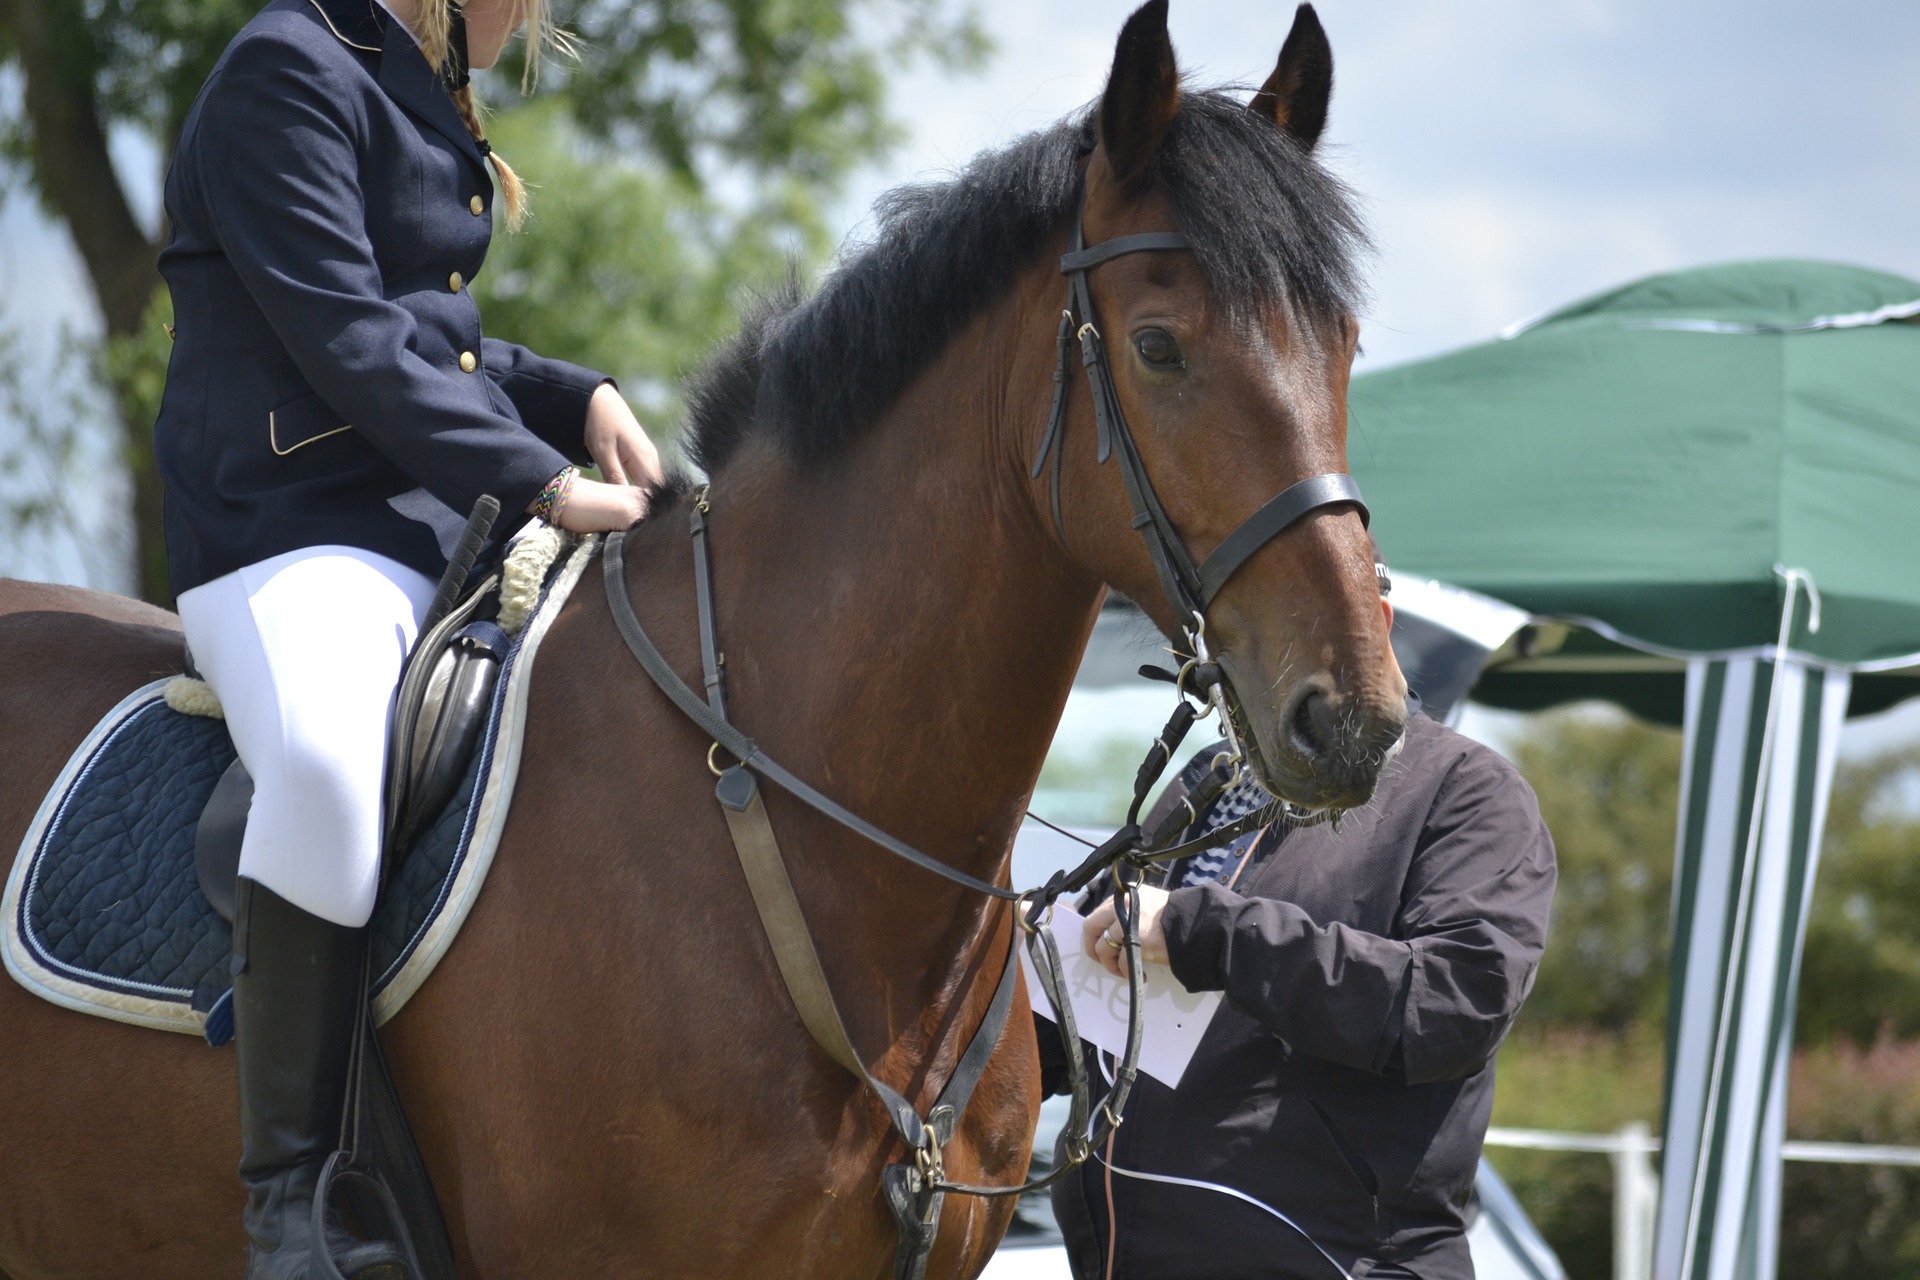 3 Key Skills to Become a Confident Horse Rider